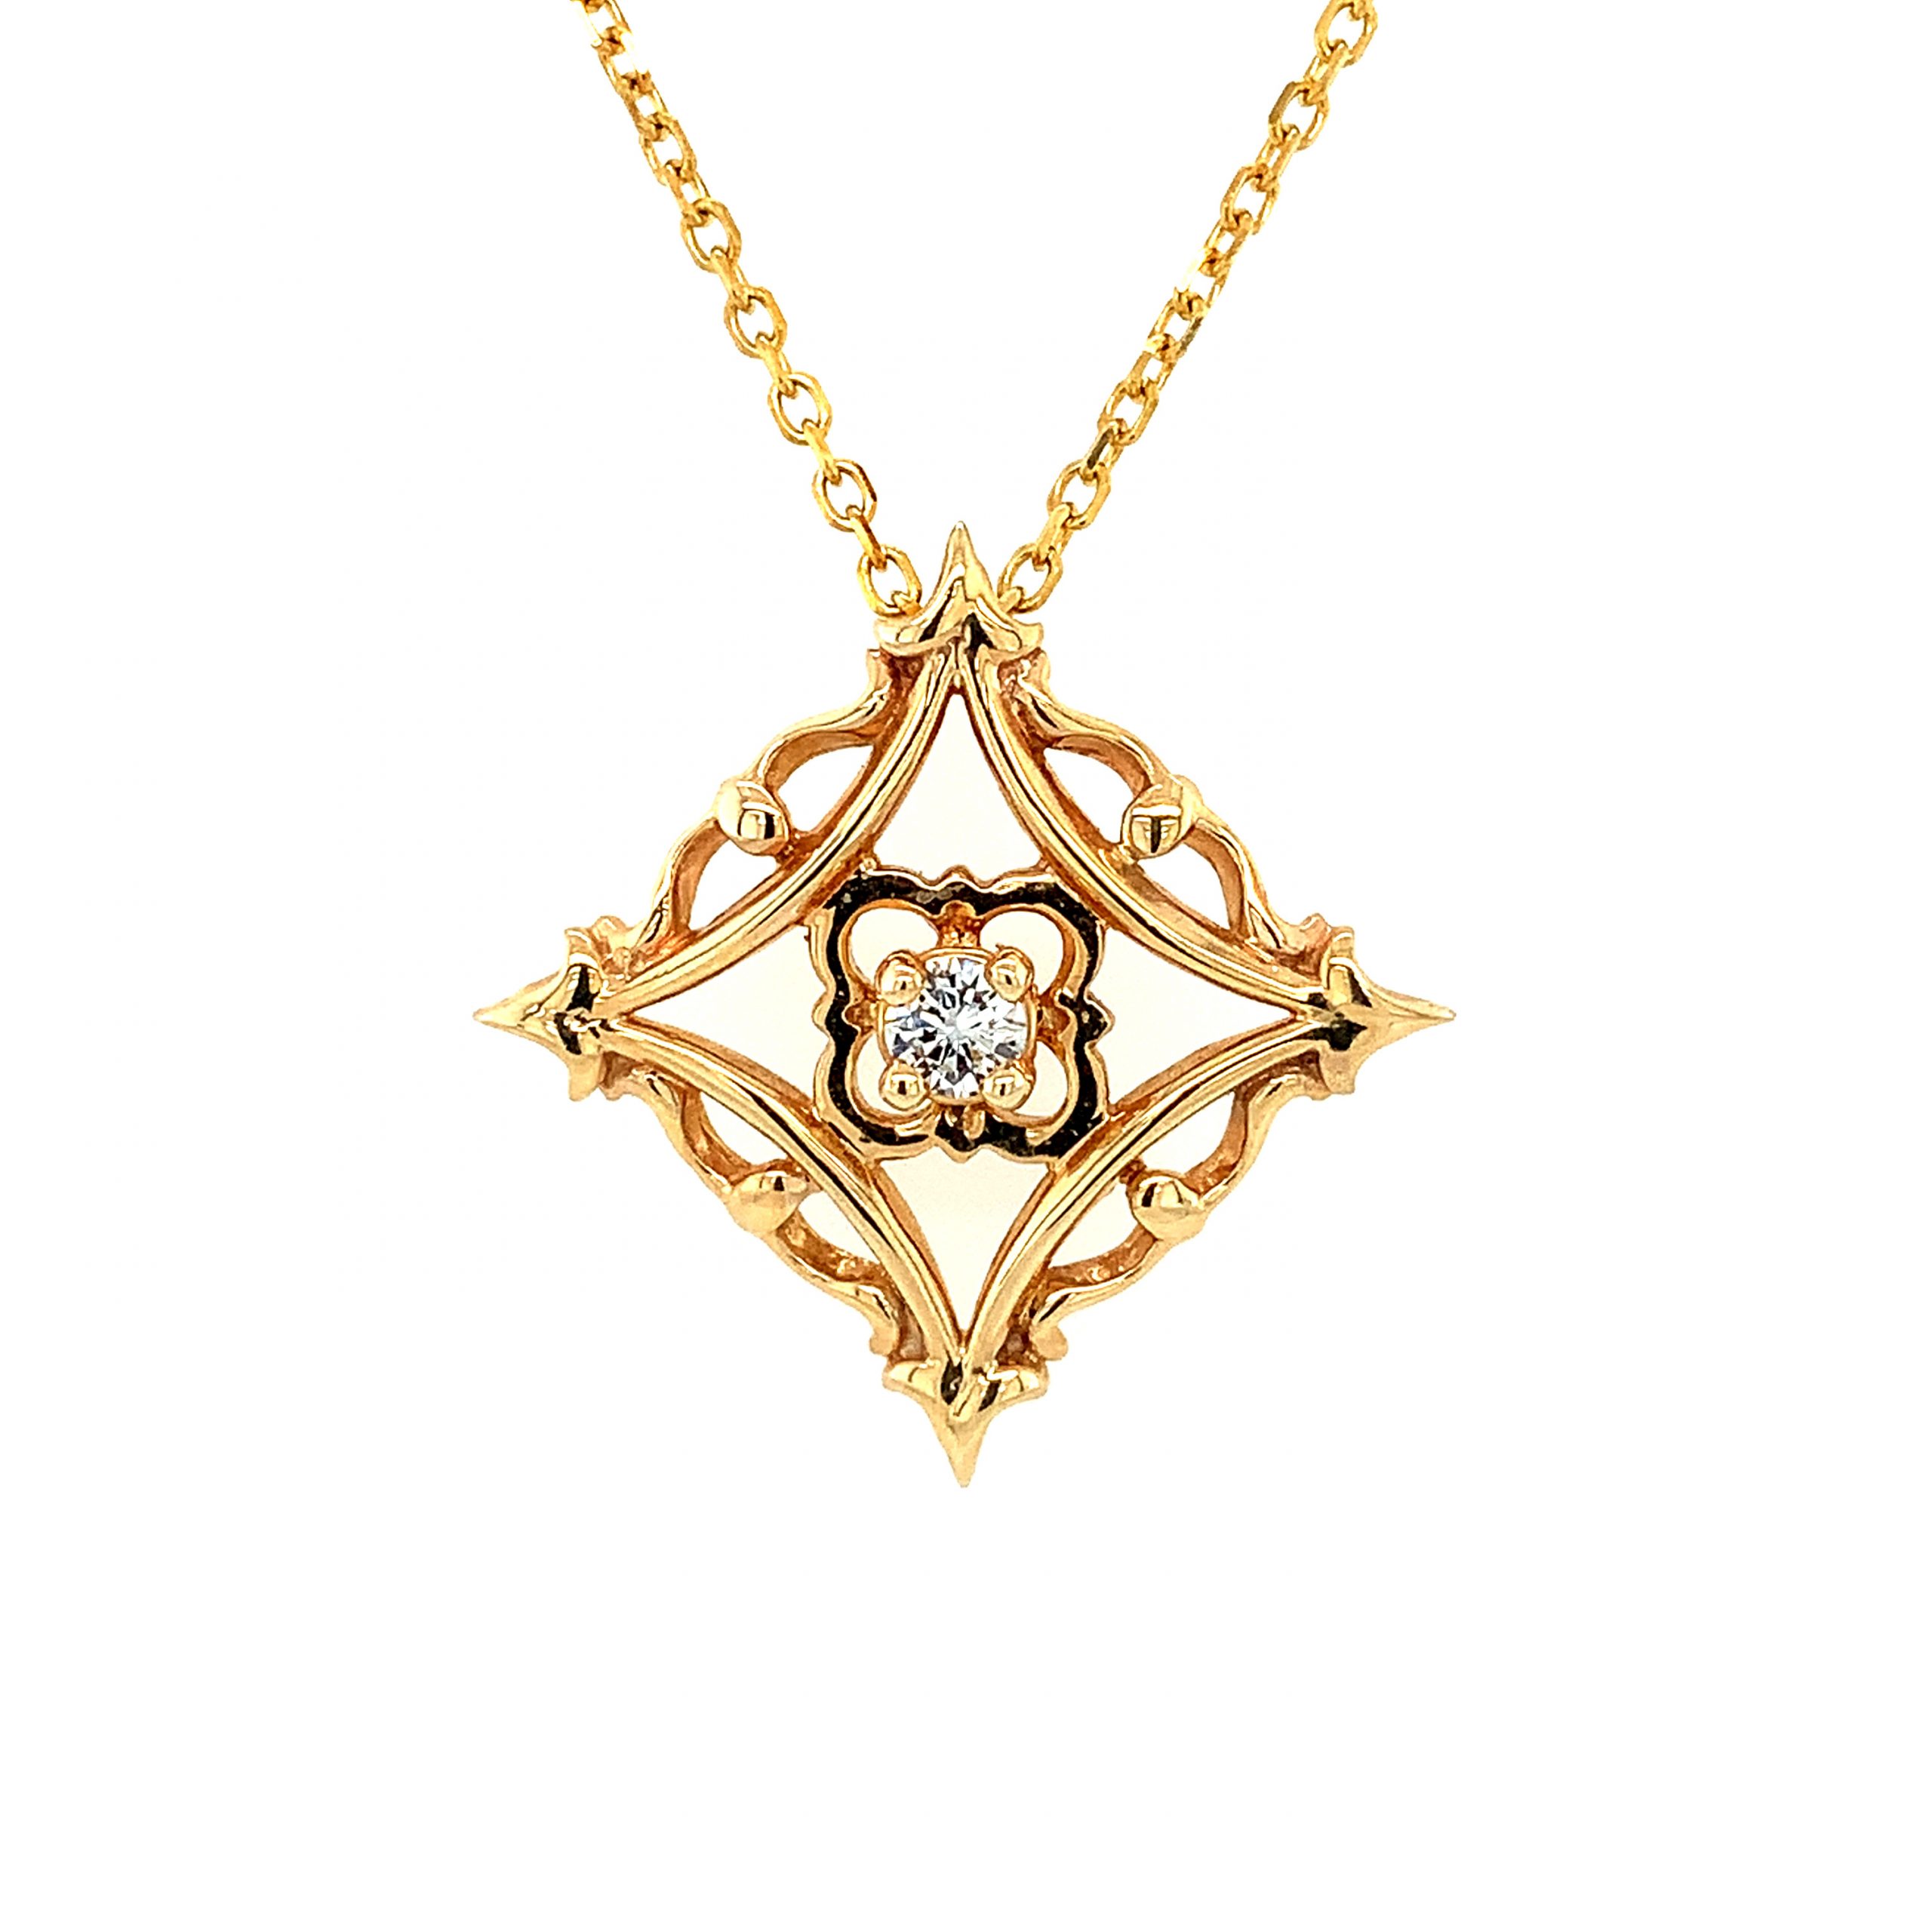 Color Blossom Pendant, Pink Gold, White Gold, Pink Opal And Diamonds -  Categories